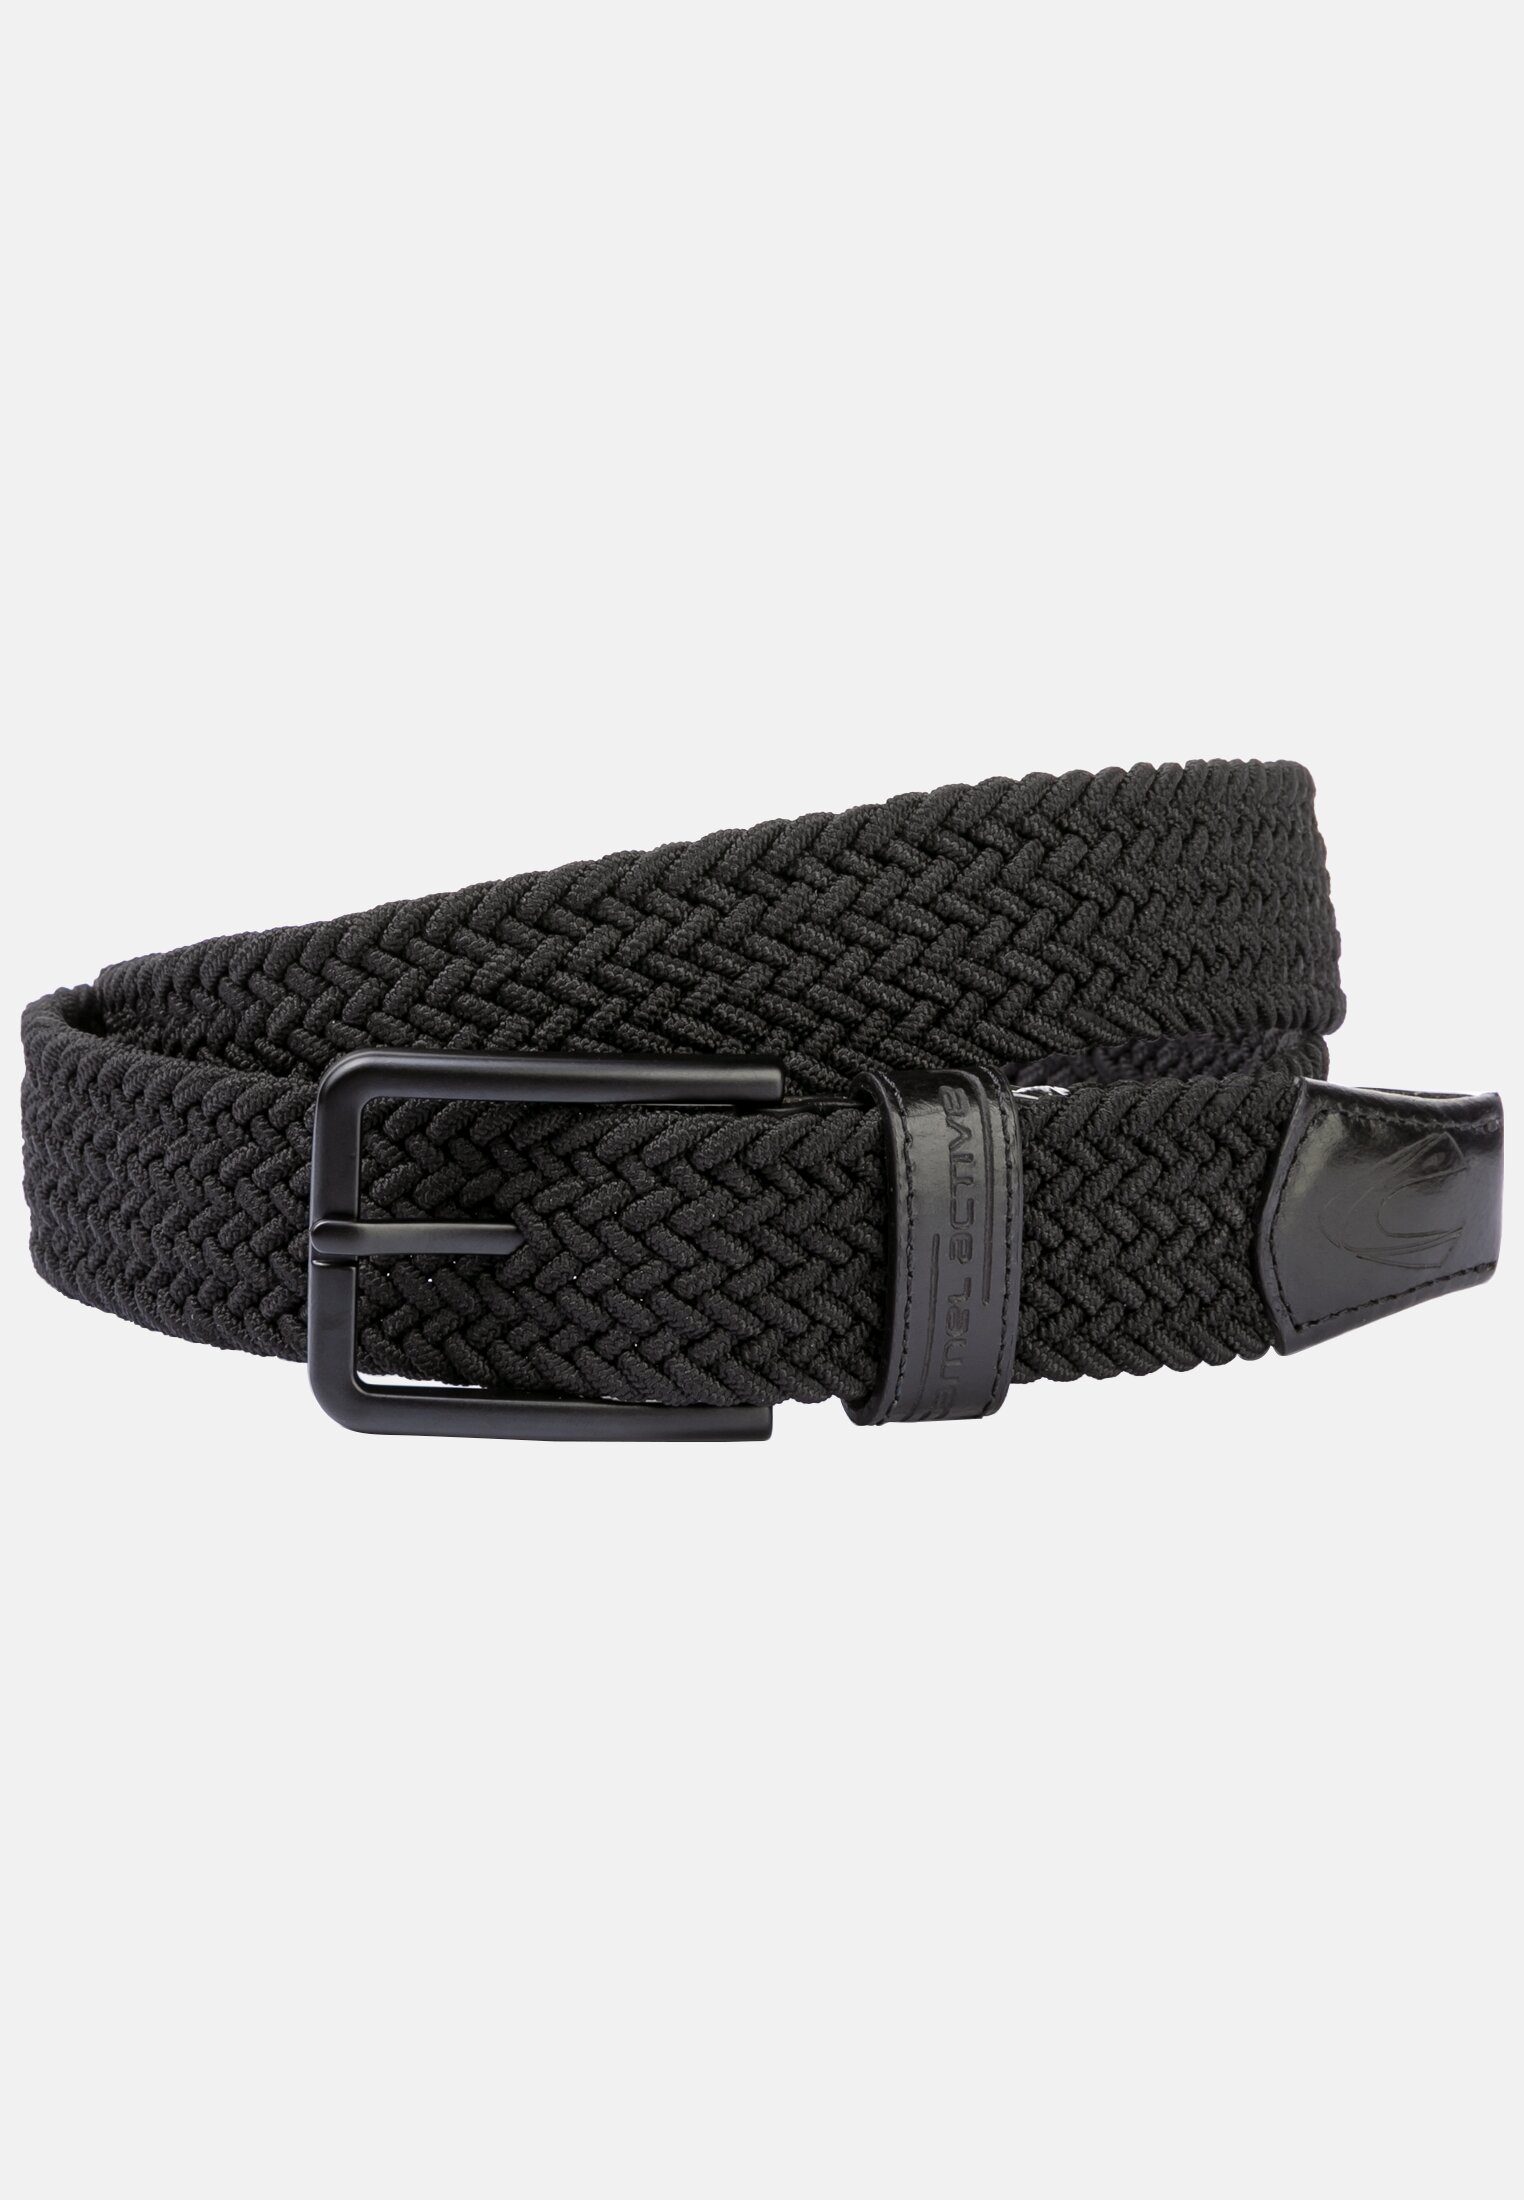 Camel Active Braided belt with leather details